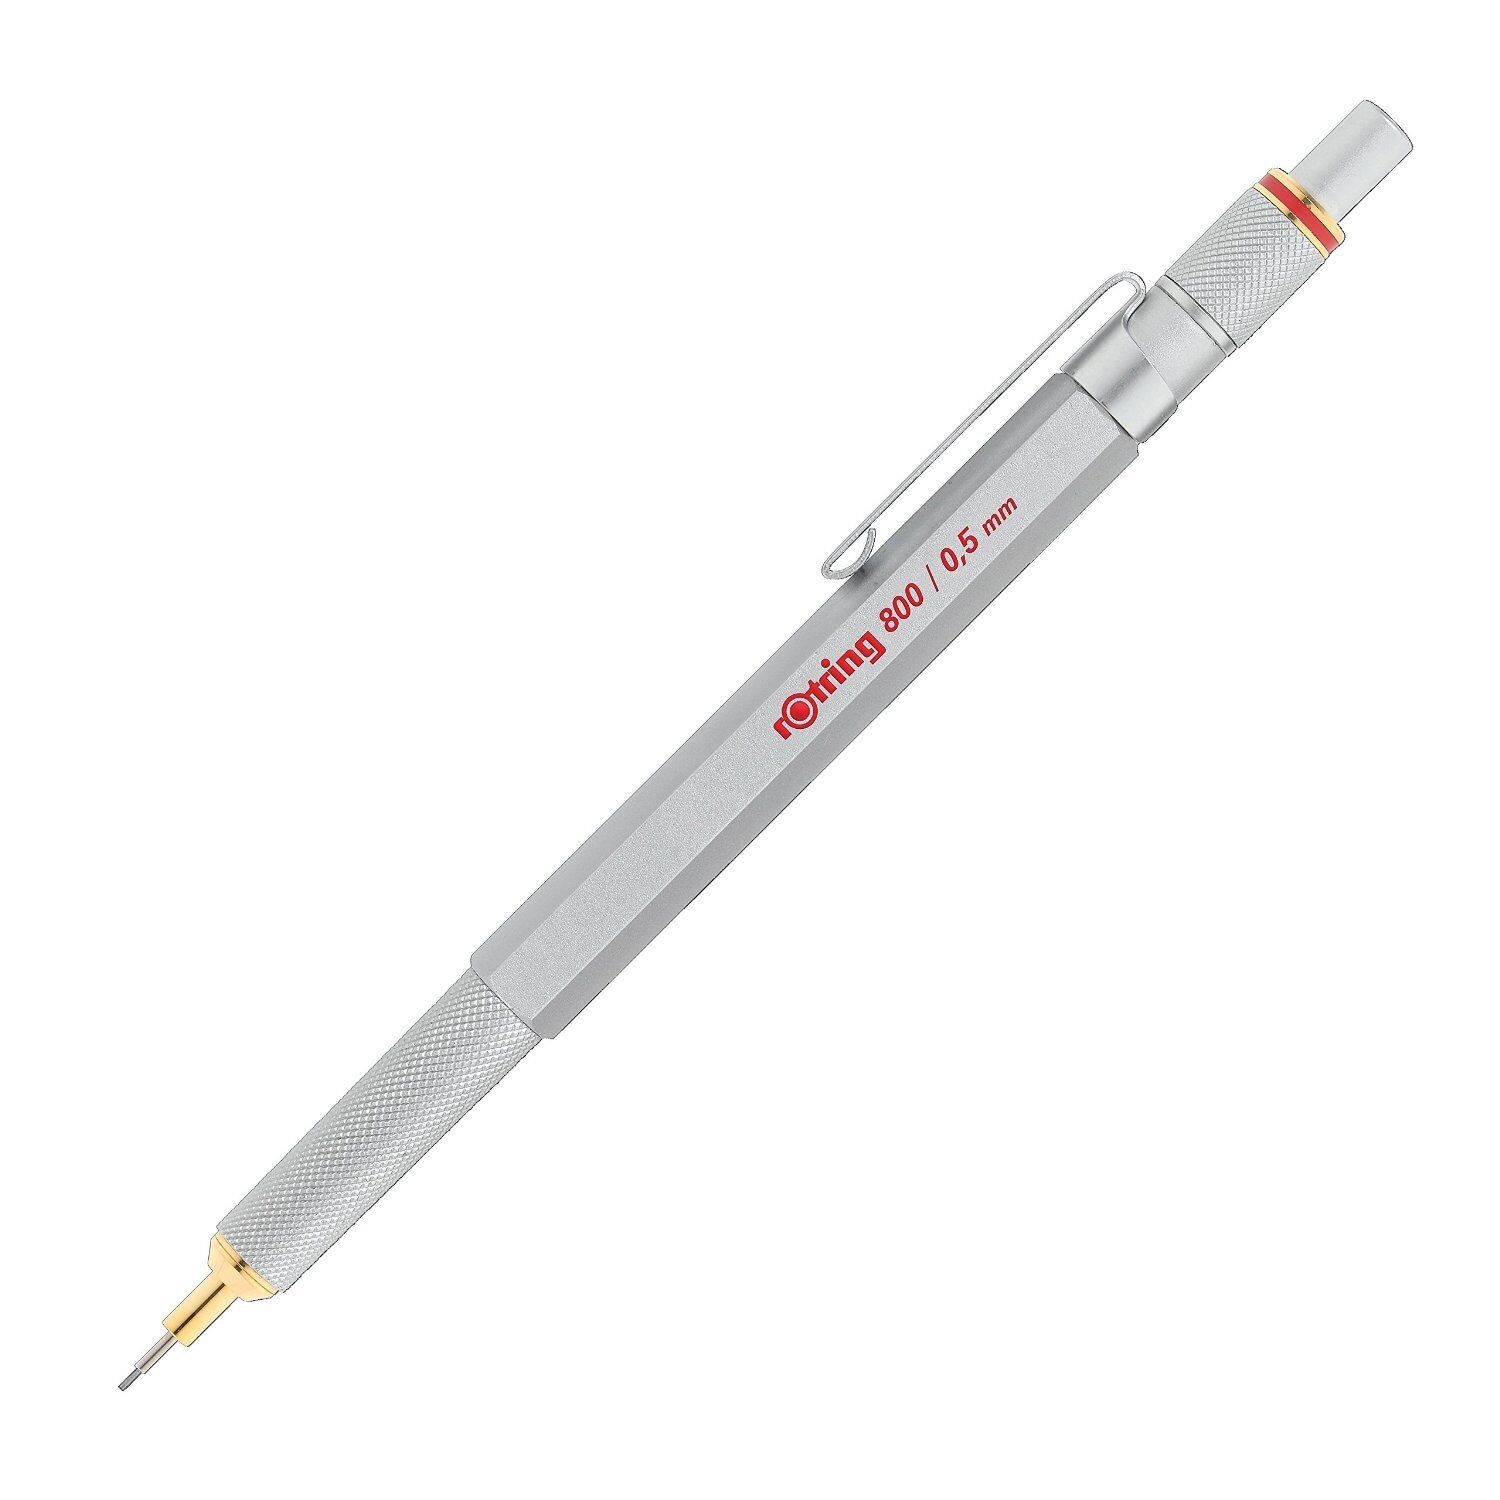 Rotring 800 Series Mechanical Pencil in Silver - 0.5mm - NEW in Box